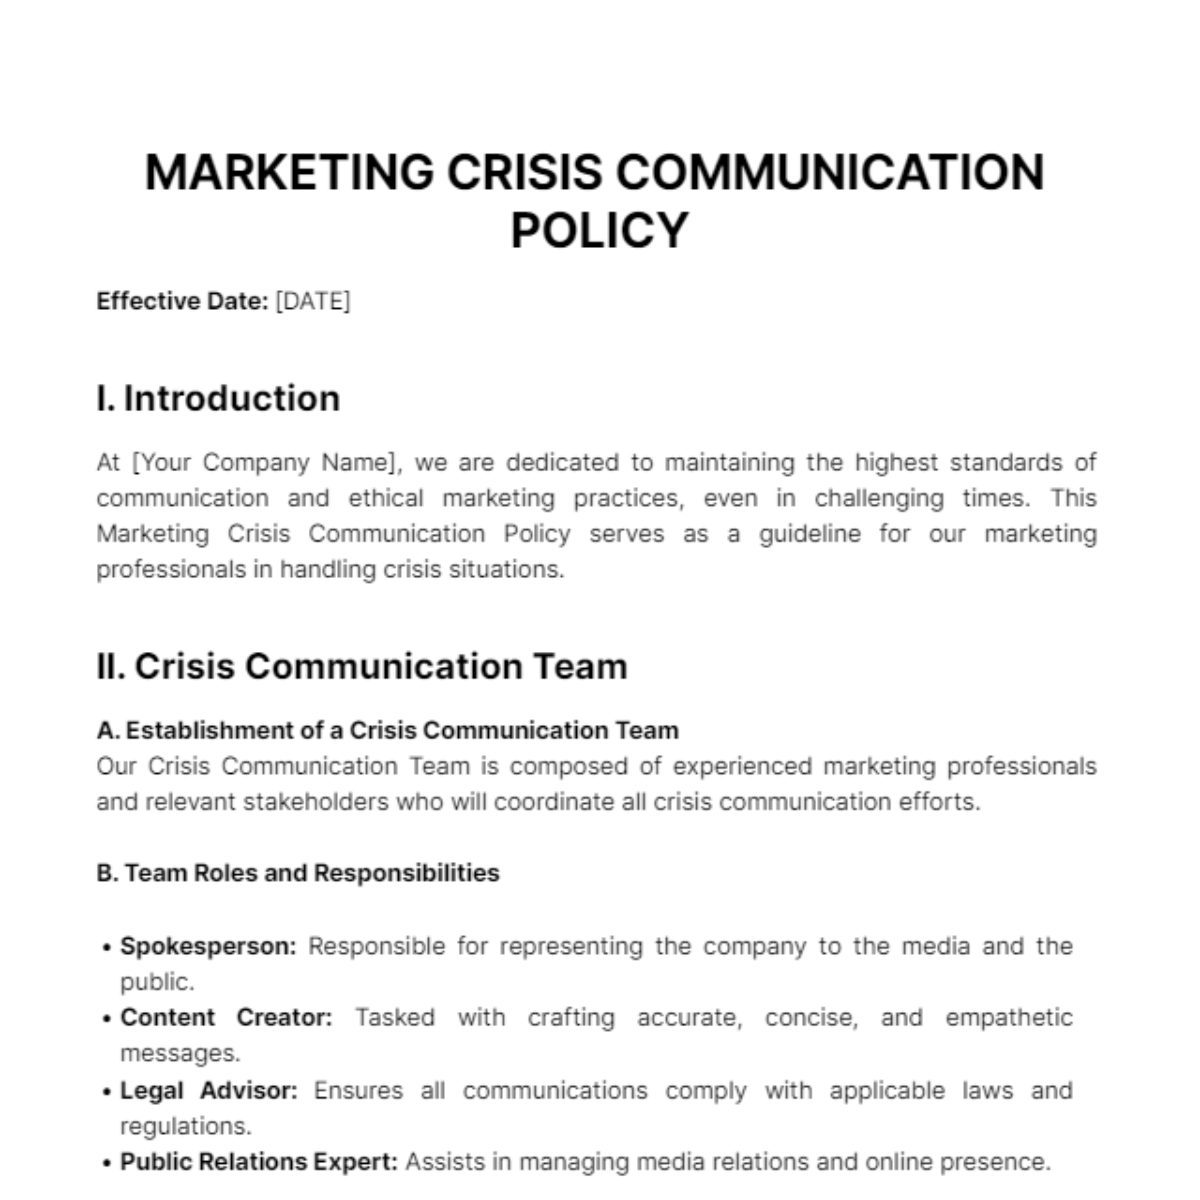 Marketing Crisis Communication Policy Template